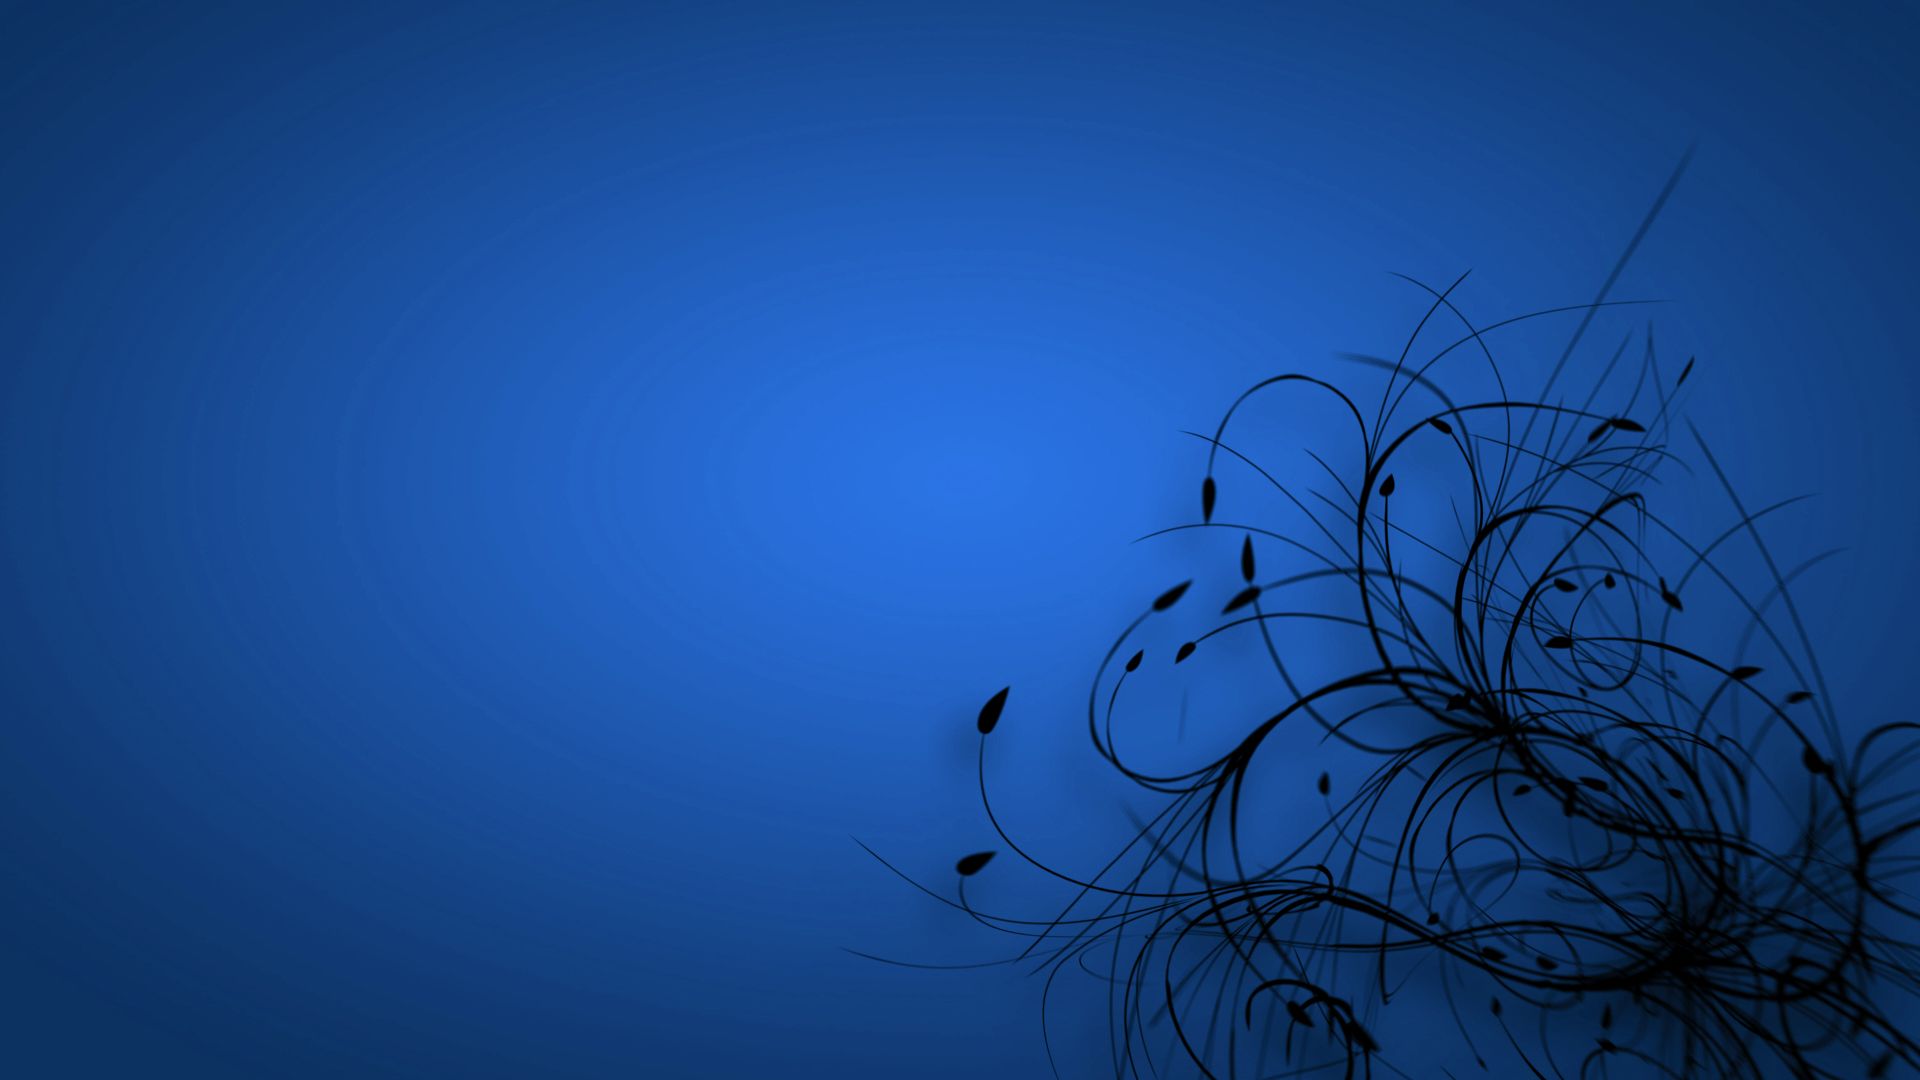 50+ Best Blue Wallpapers In High Definition Quality - Templatefor